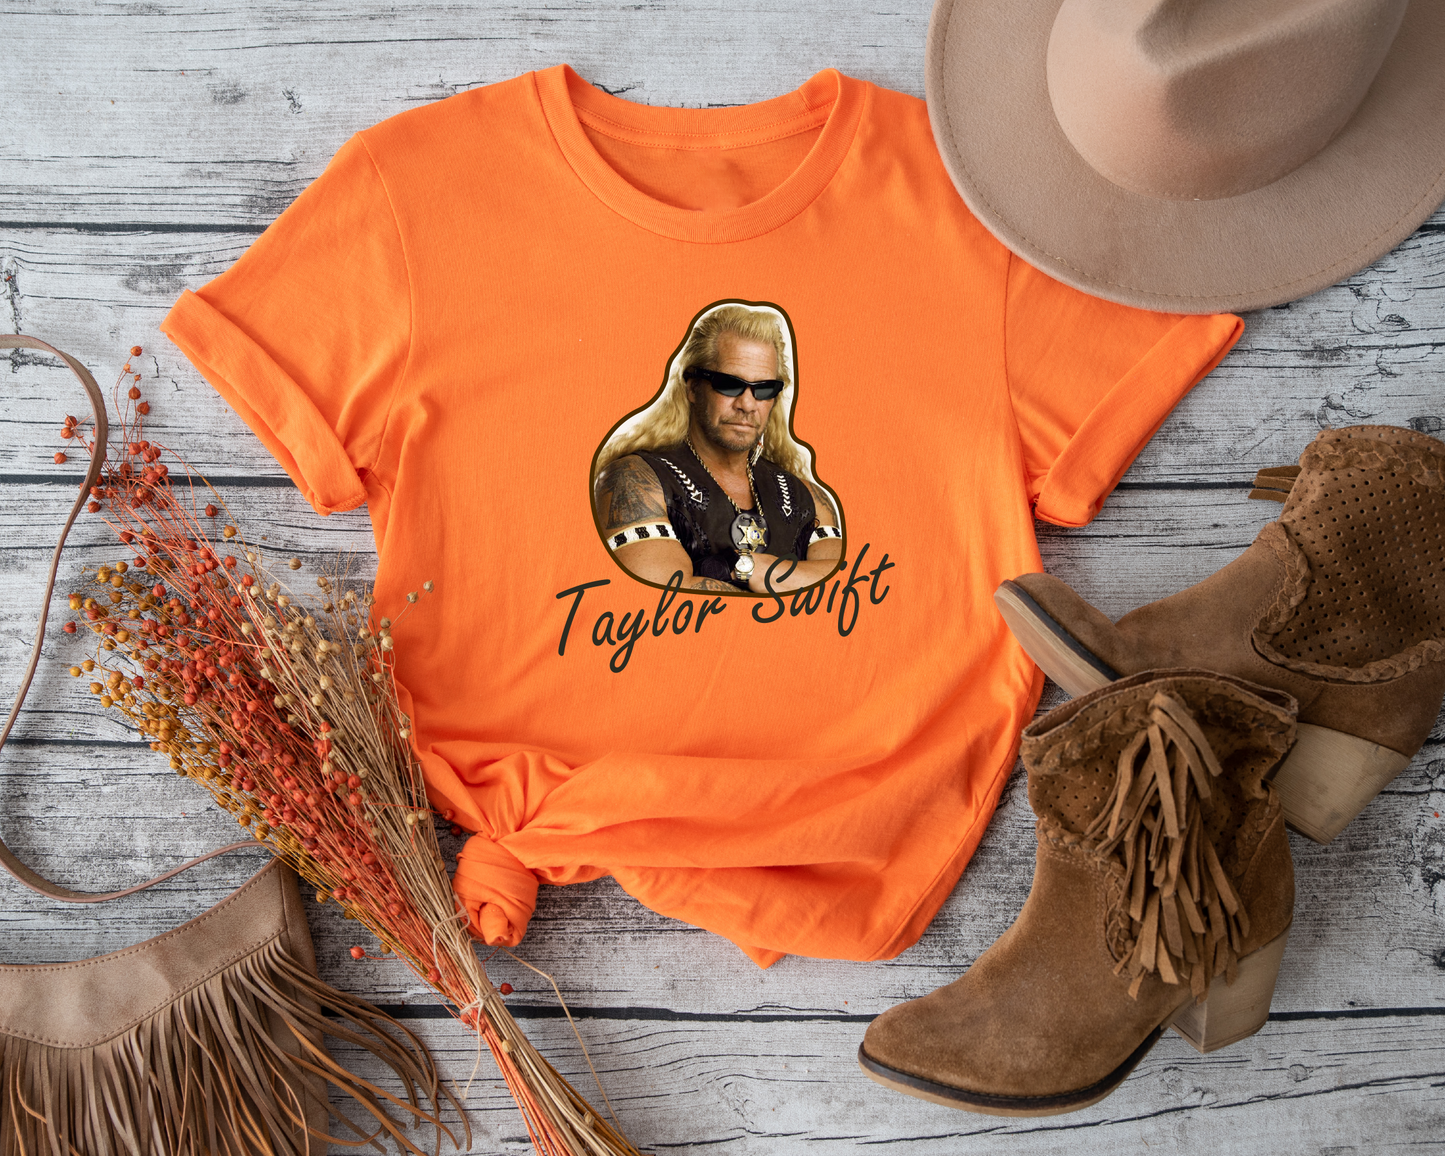 Combine your fandoms of Taylor Swift and Dog the Bounty Hunter with this delightful tee.